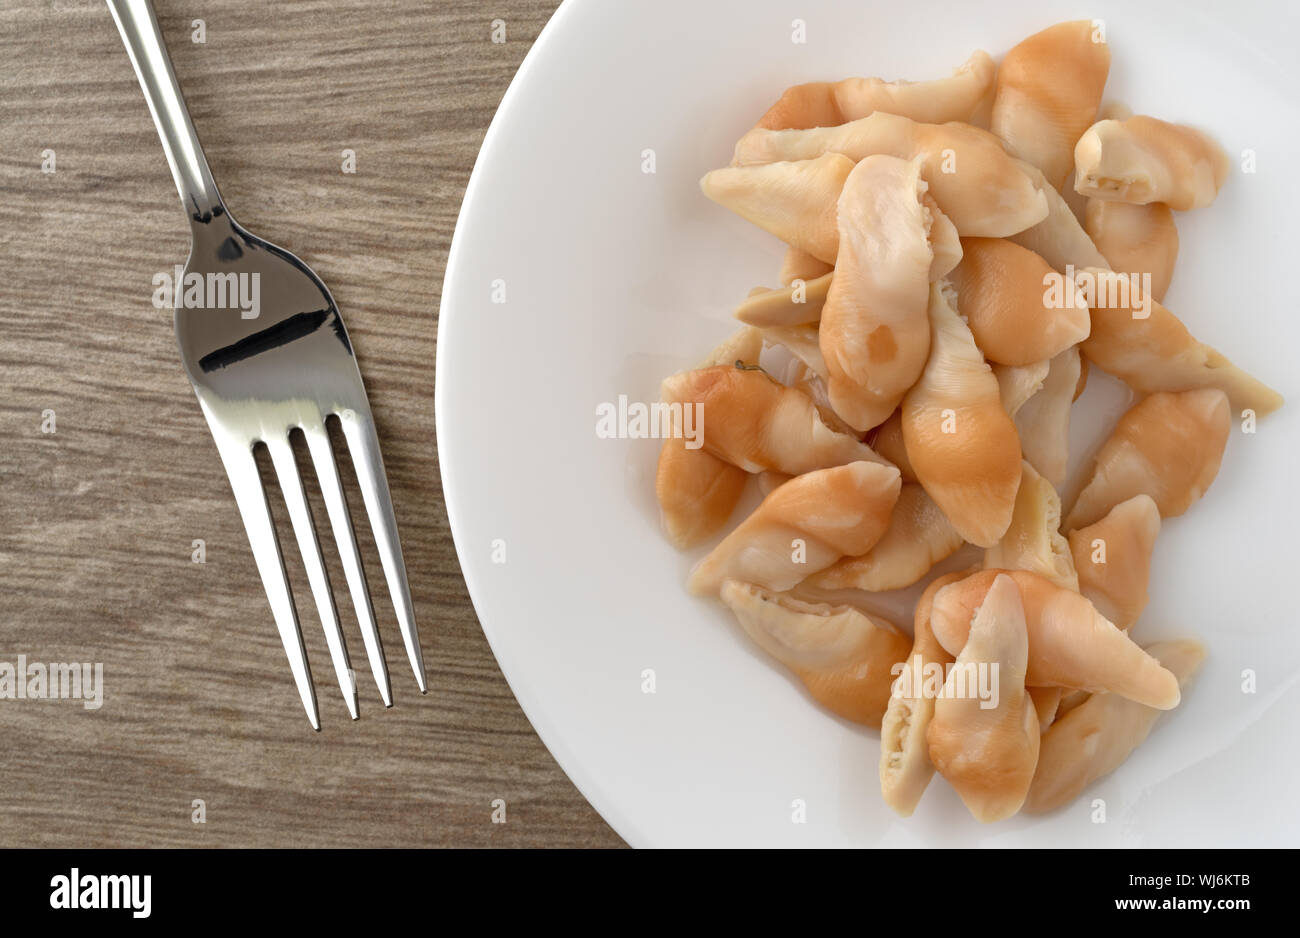 Top view of a serving of razor clams on a white plate with a fork to the side on a table illuminated with natural lighting. Stock Photo